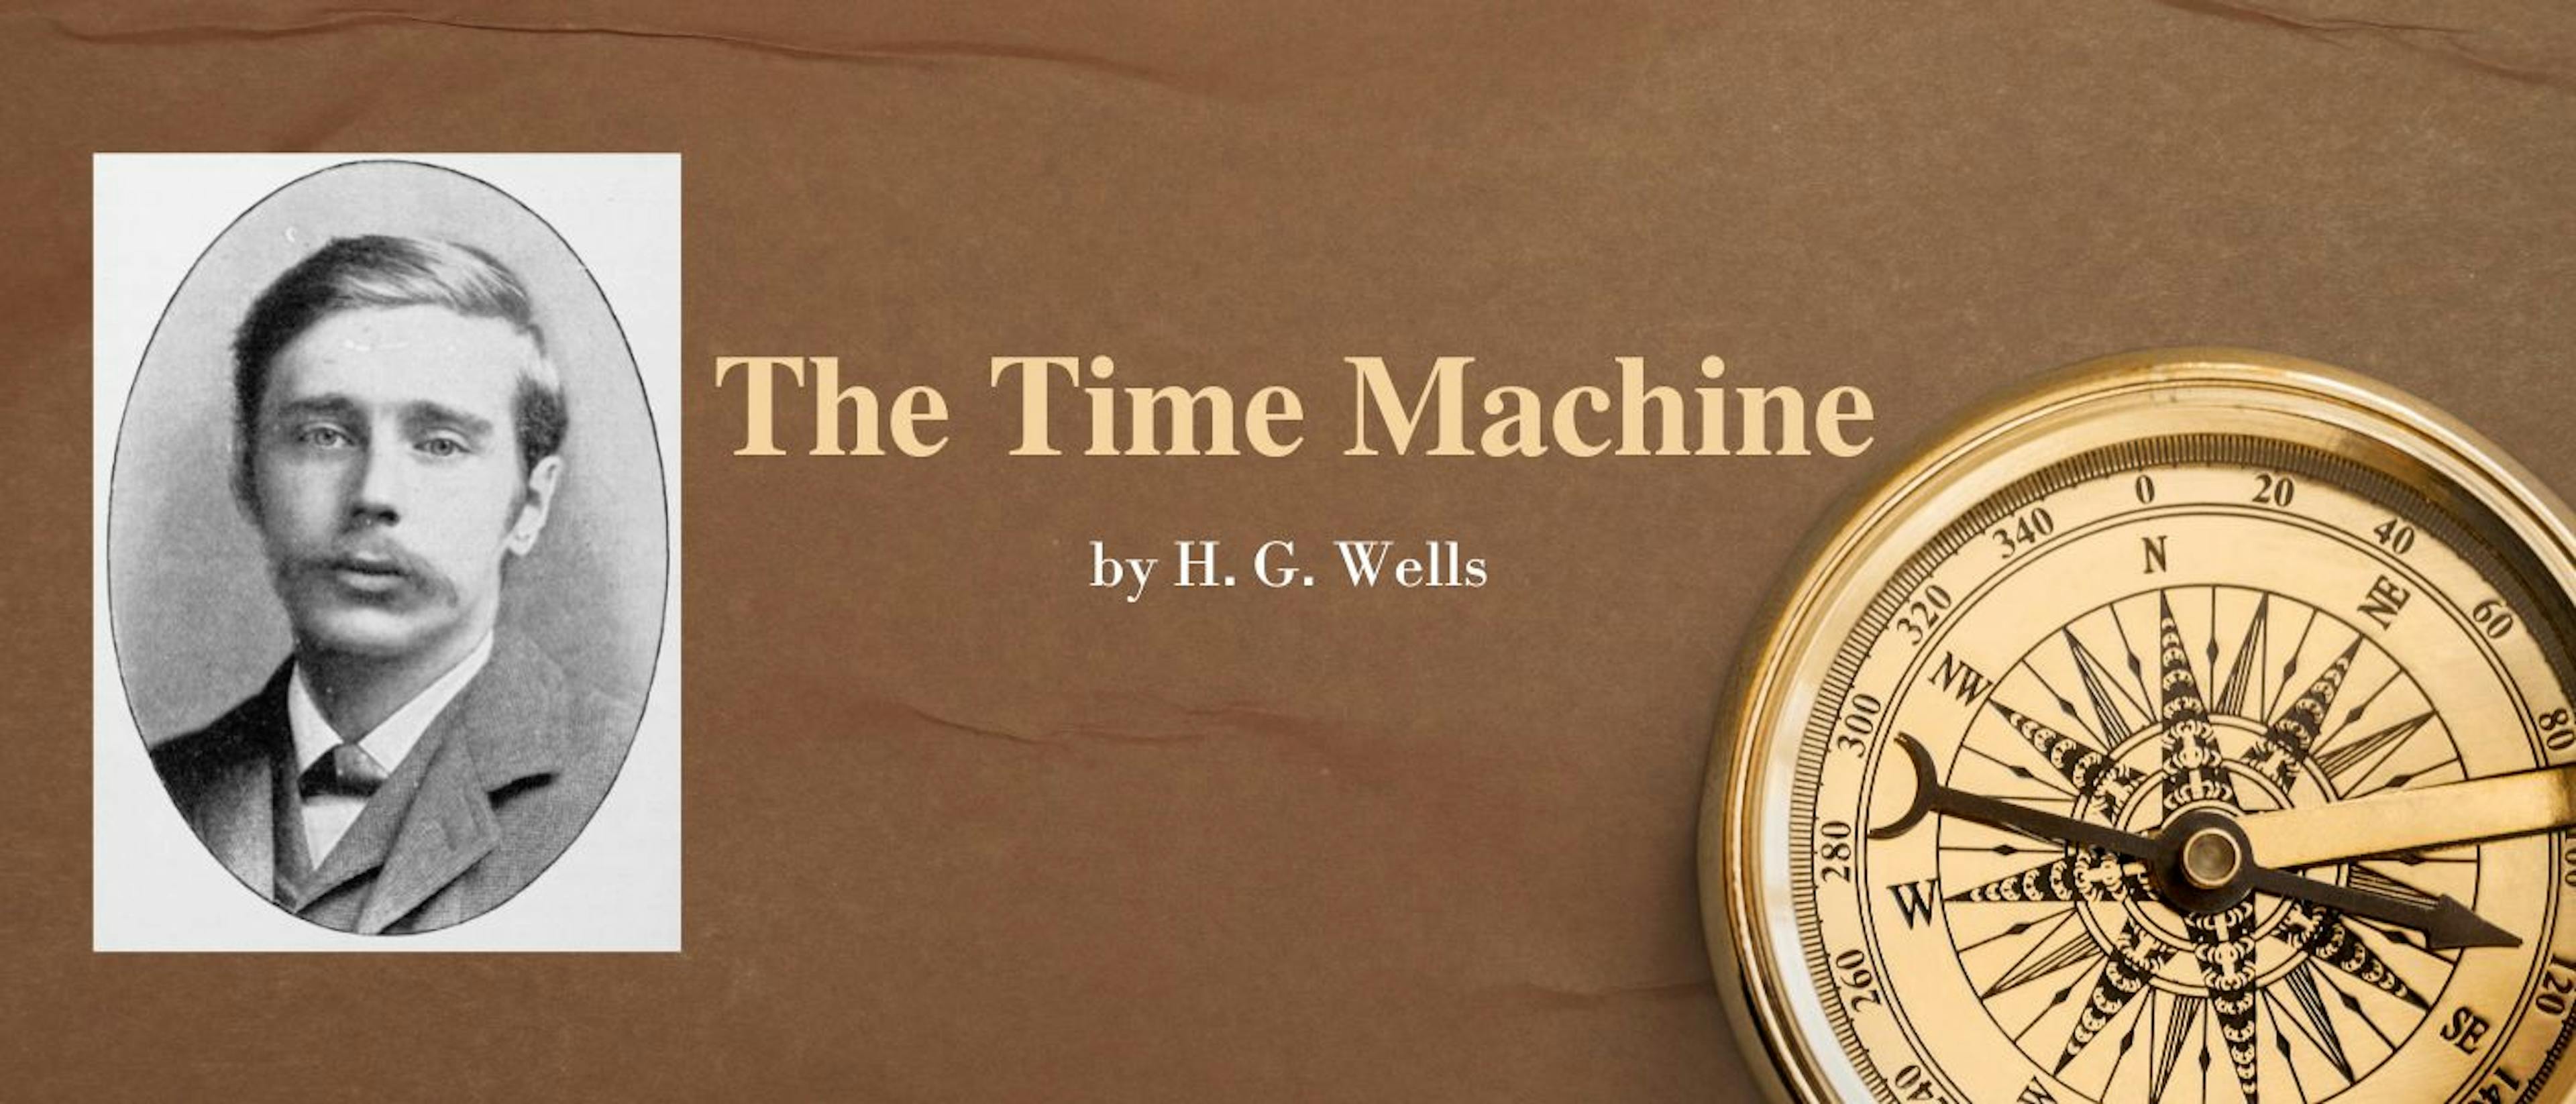 featured image - The Time Machine: IV. Time Travelling